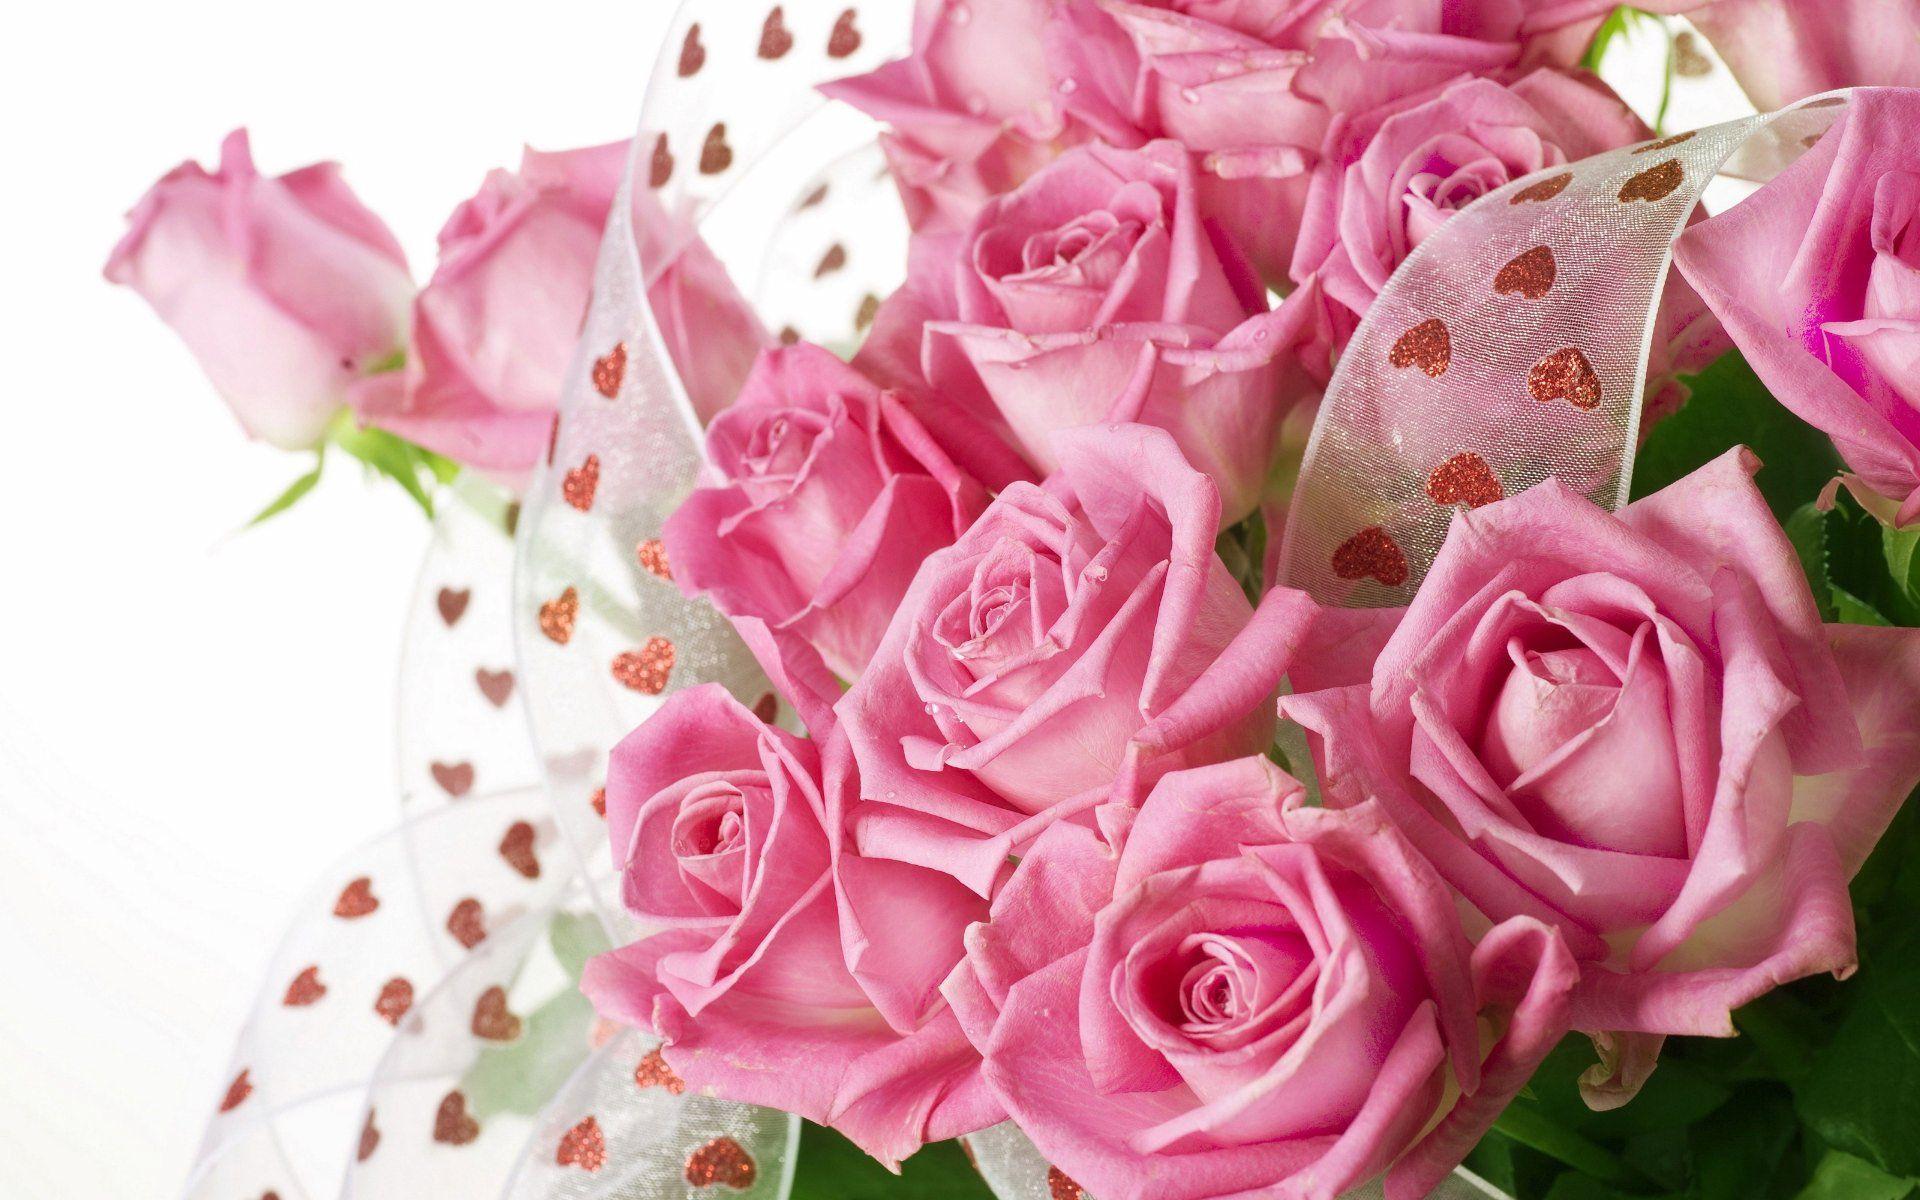 One dozen light pink roses at from you flowers, Pink roses are a